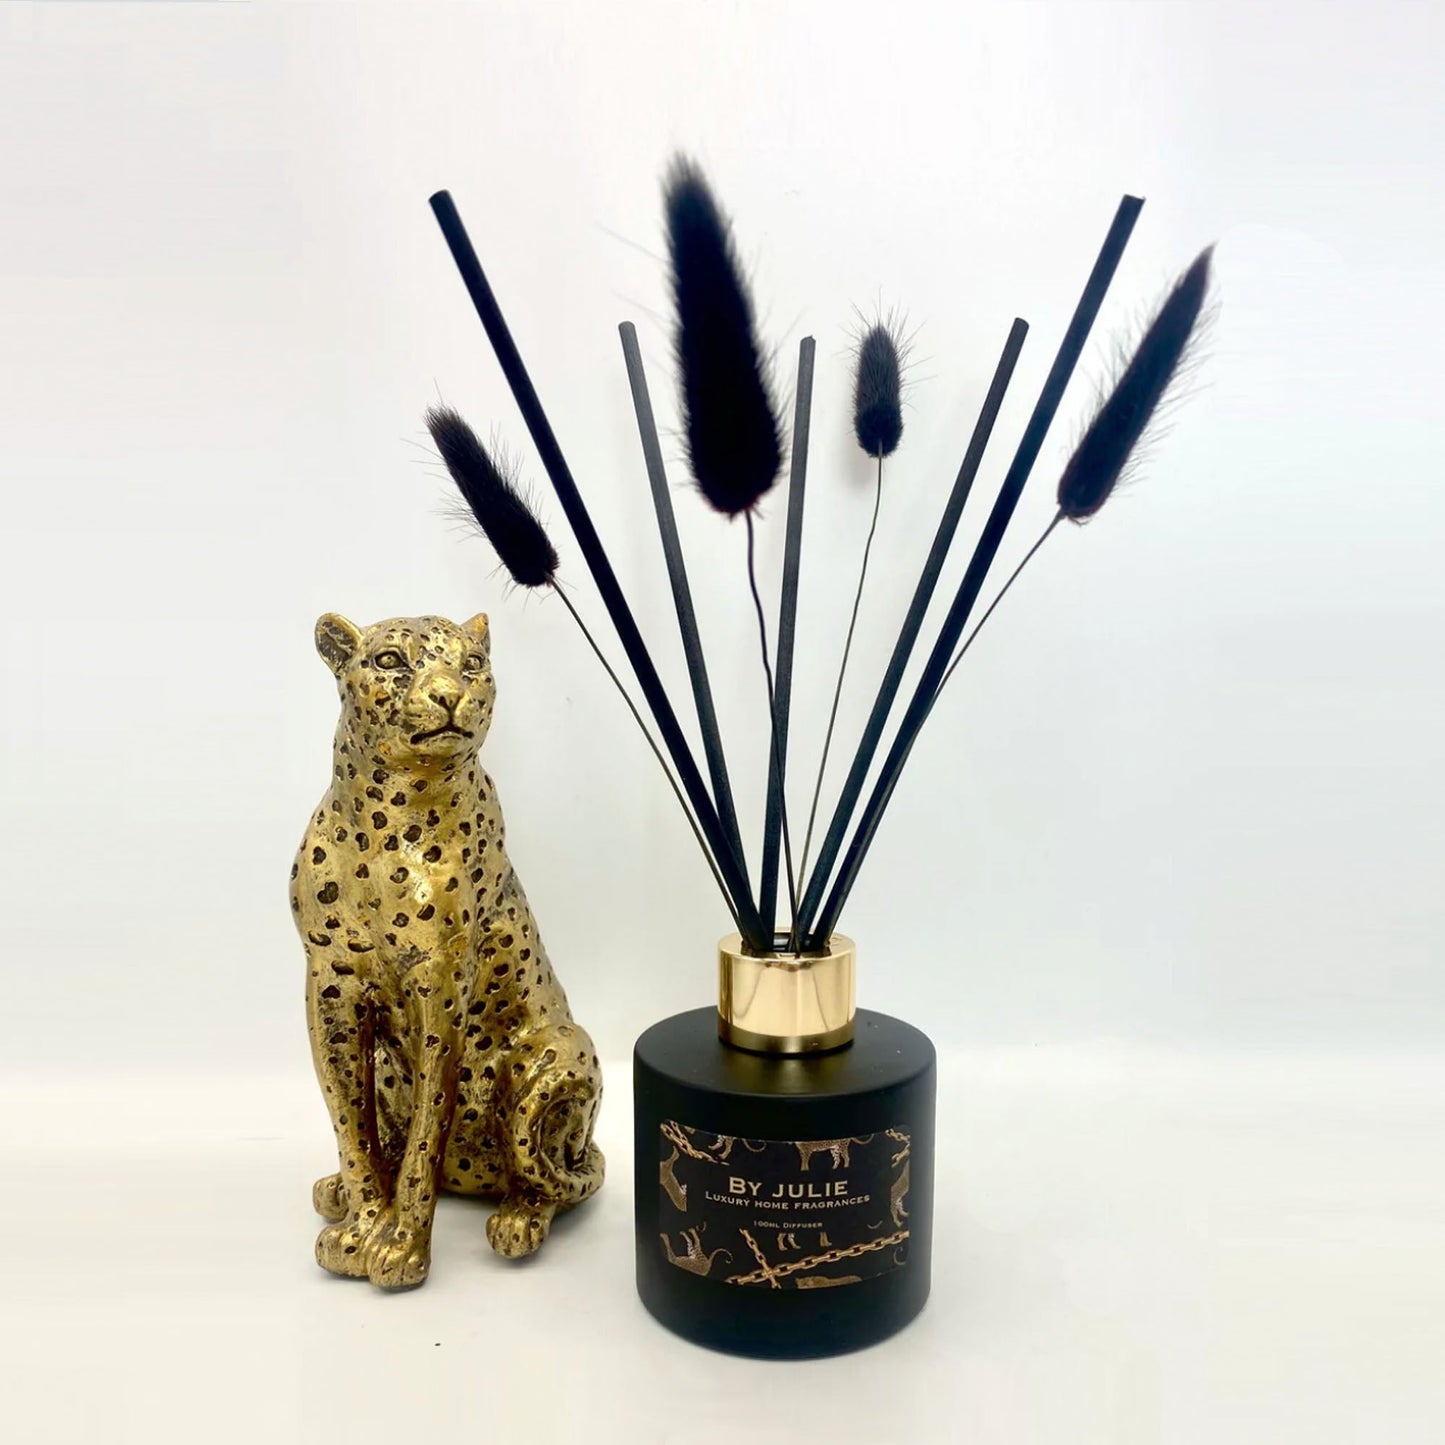 Luxus Bunny Tail Reed Diffuser - Fairydust